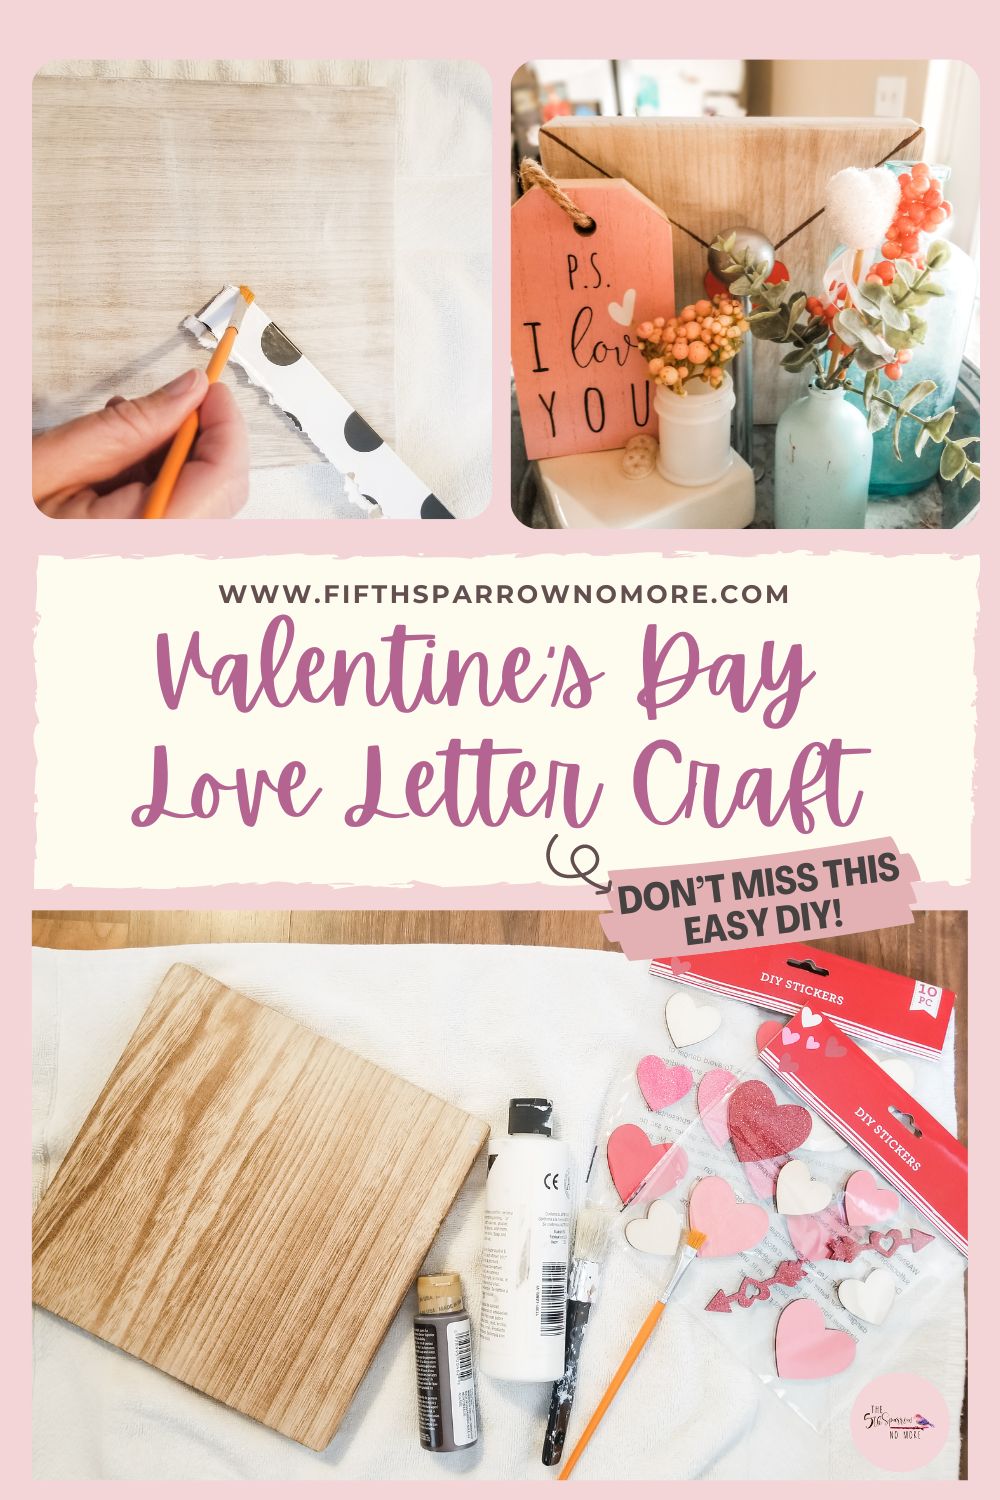 A simple DIY Valentine craft - create a wood love letter to include in a tiered tray, on a mantel or vignette in a Valentine display.